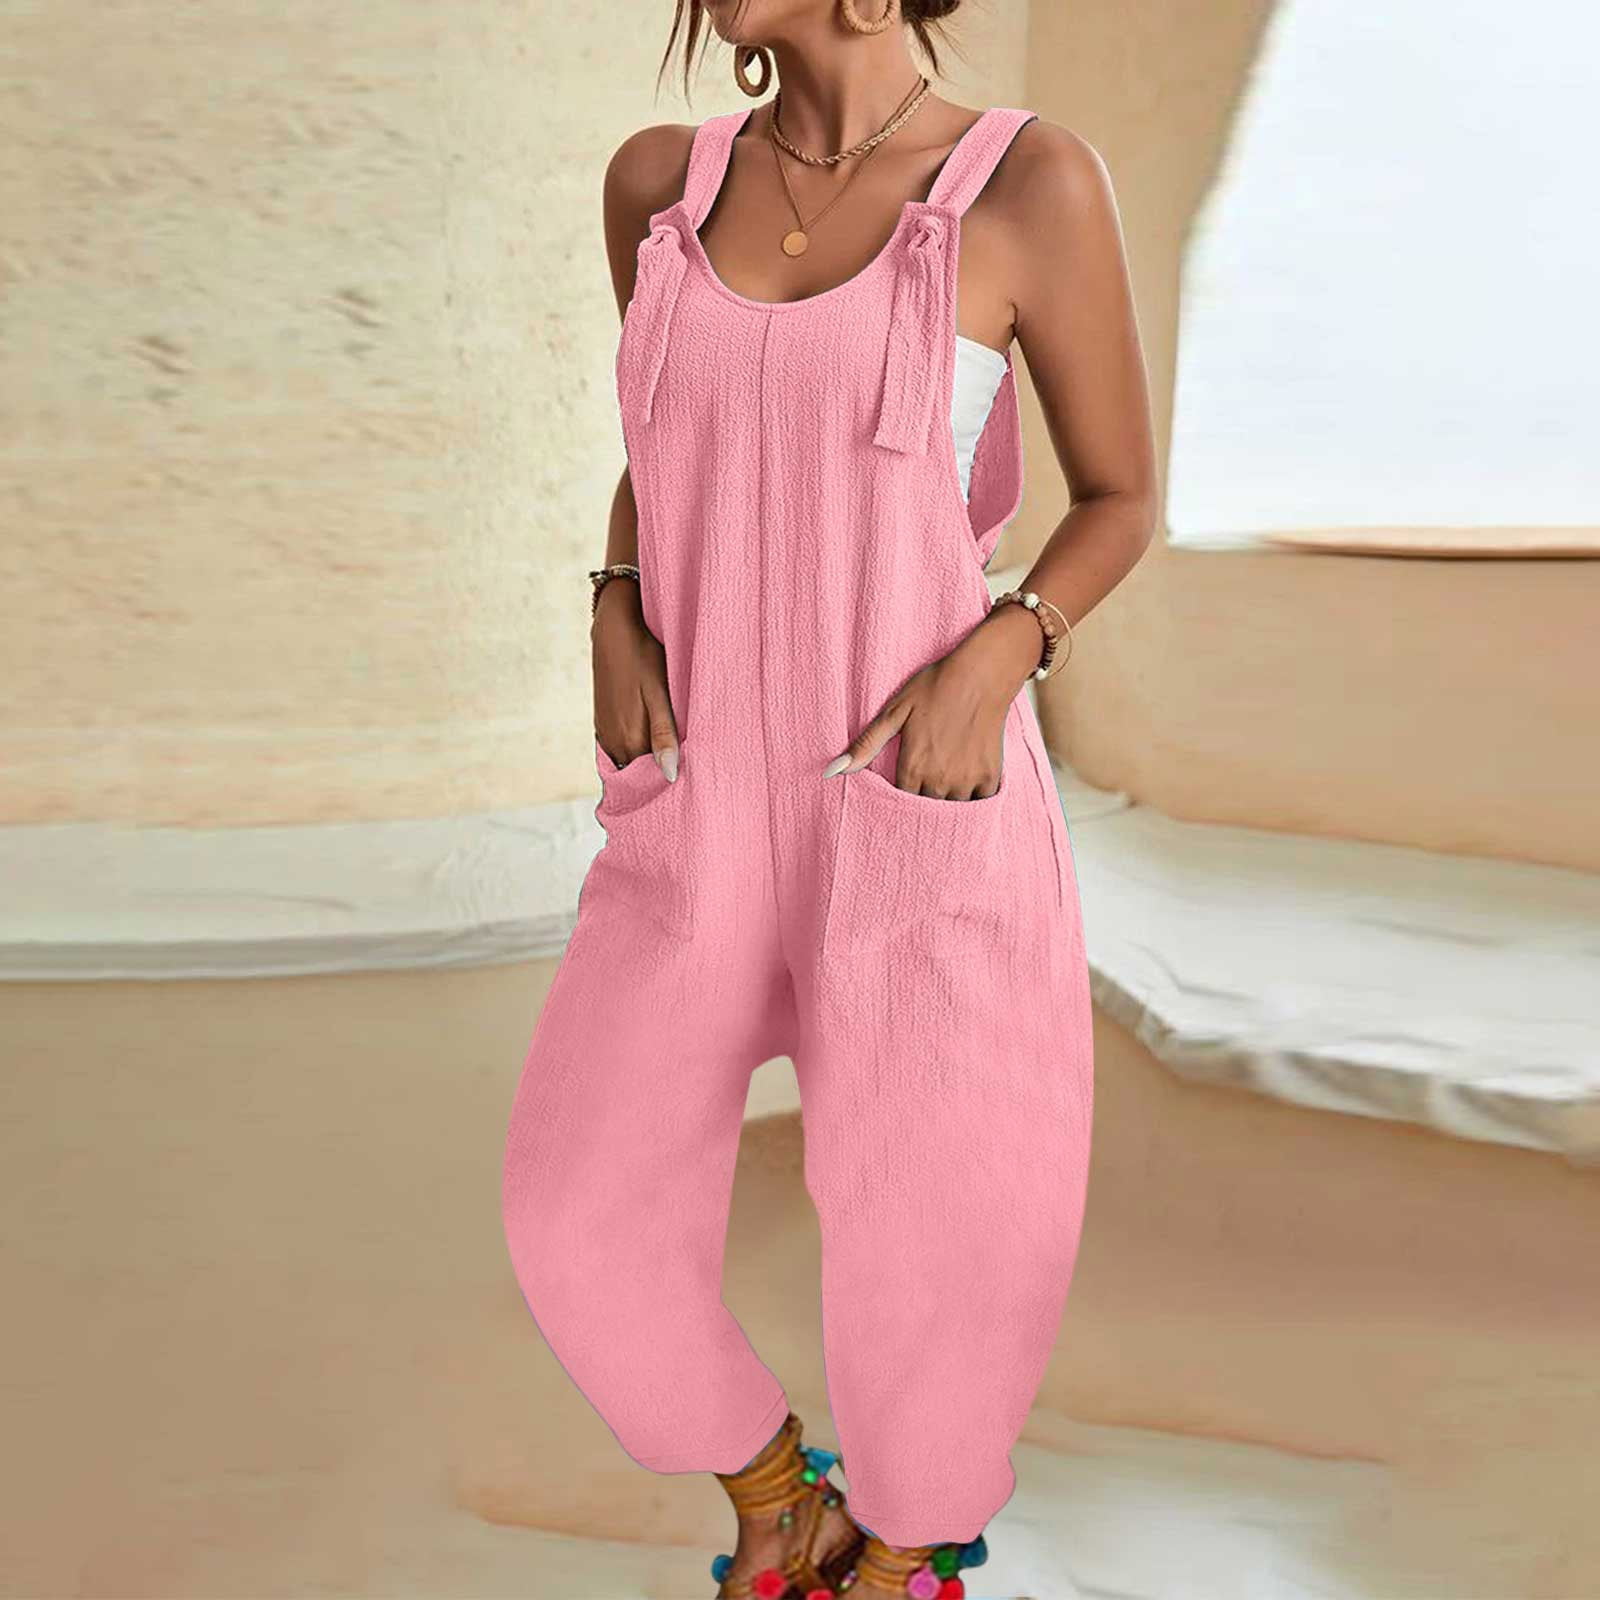 Comfortable Cartoon Print Ribbed Jumpsuit Womens Cute Rompers, Bodycon  Playsuit, And Elegant Overalls For Clubwear K8679 From Clothes_1, $11.36 |  DHgate.Com